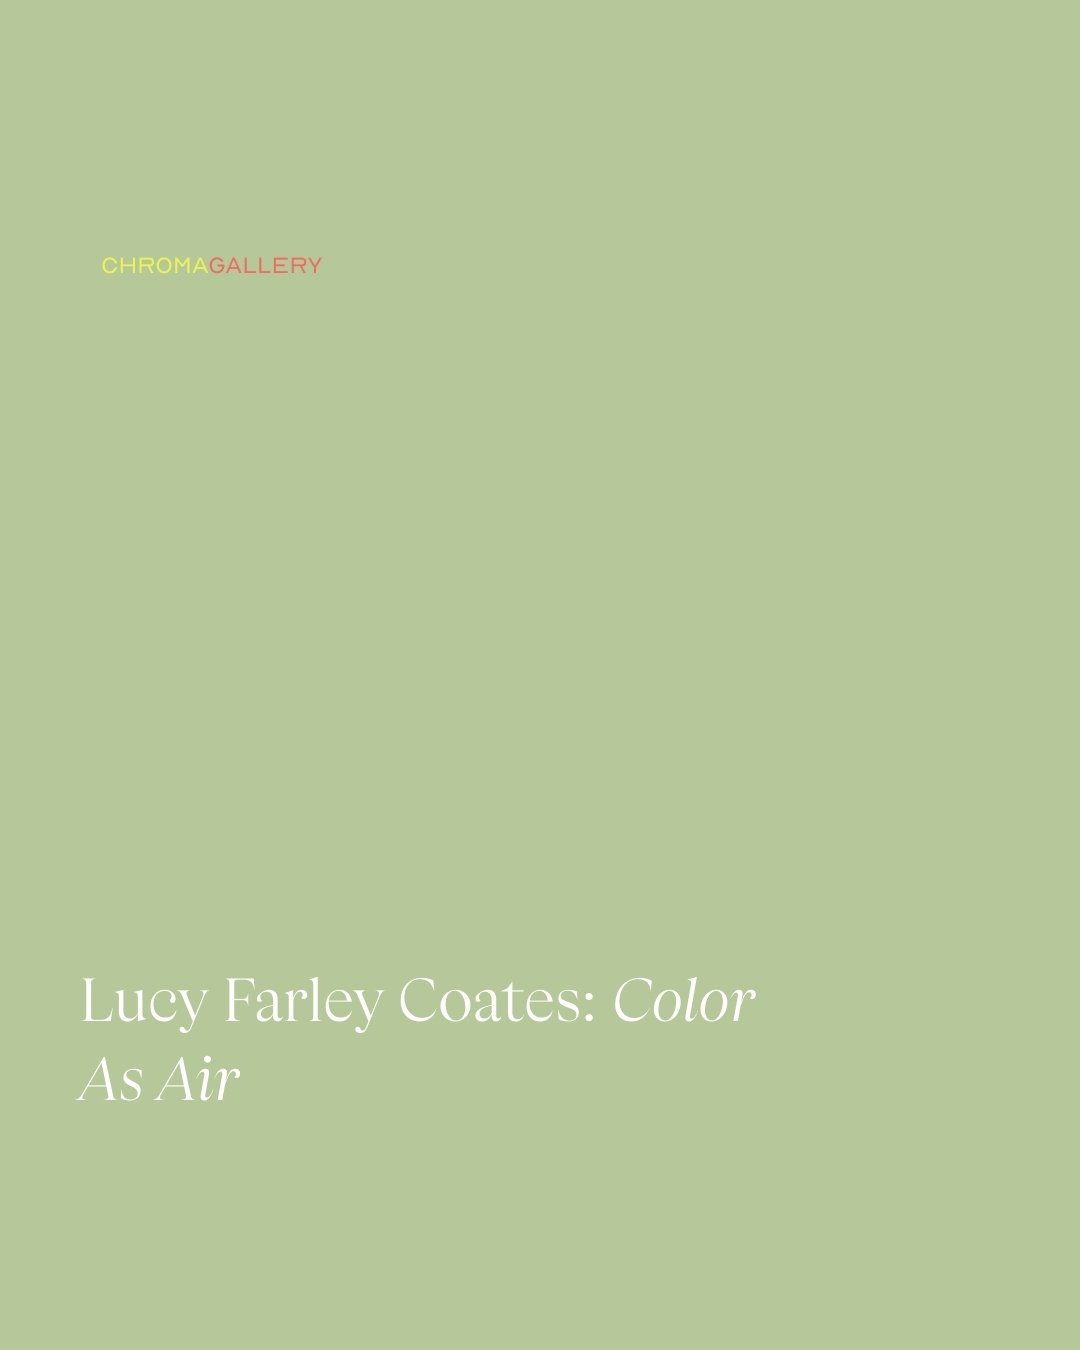 Lucy Farley Coates: Color as Air opens in the Chroma Gallery with a First Friday reception on May 3rd from 5-7pm, and will continue through the entire month.

Lucy Coates's tender watercolor paintings are evanescent meditations on the fleeting beauty